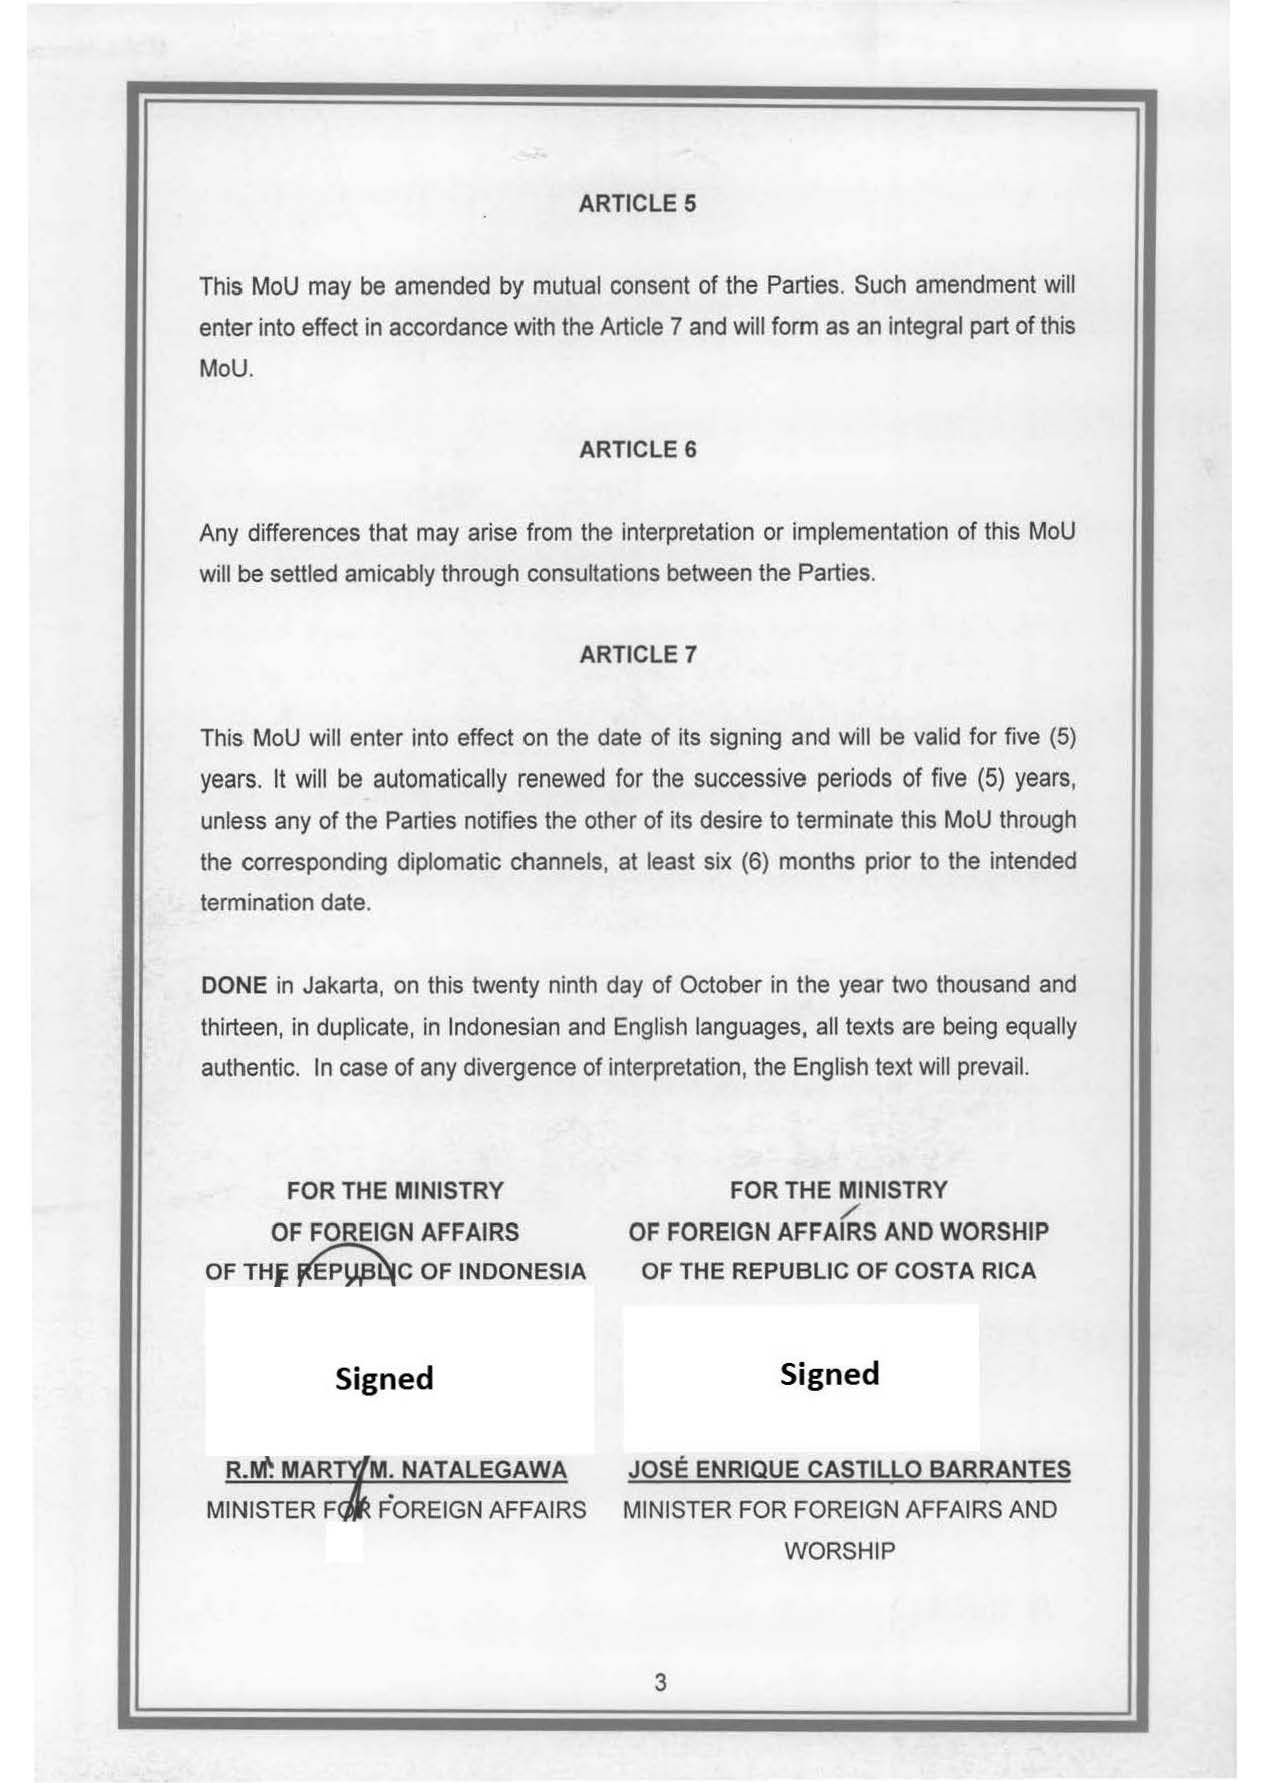 ARTICLE 5 This MoU may be amended by mutual consent of the Parties. Such amendment will enter into effect in accordance with the Article 7 and will form as an integral part of this MoU.